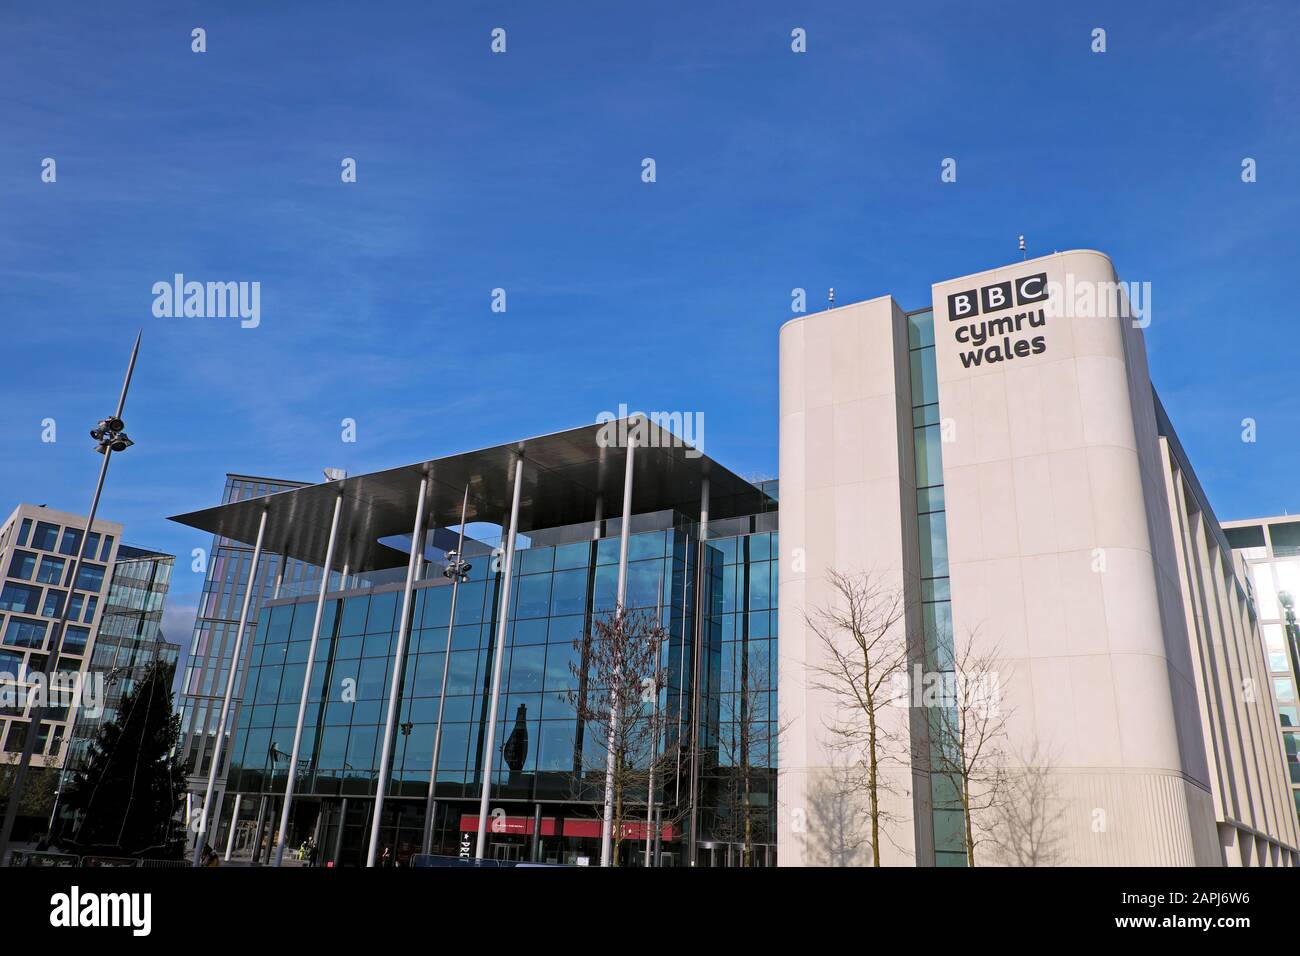 BBC Wales Cymru new building architecture in Central Square city centre Cardiff Wales UK  KATHY DEWITT Stock Photo